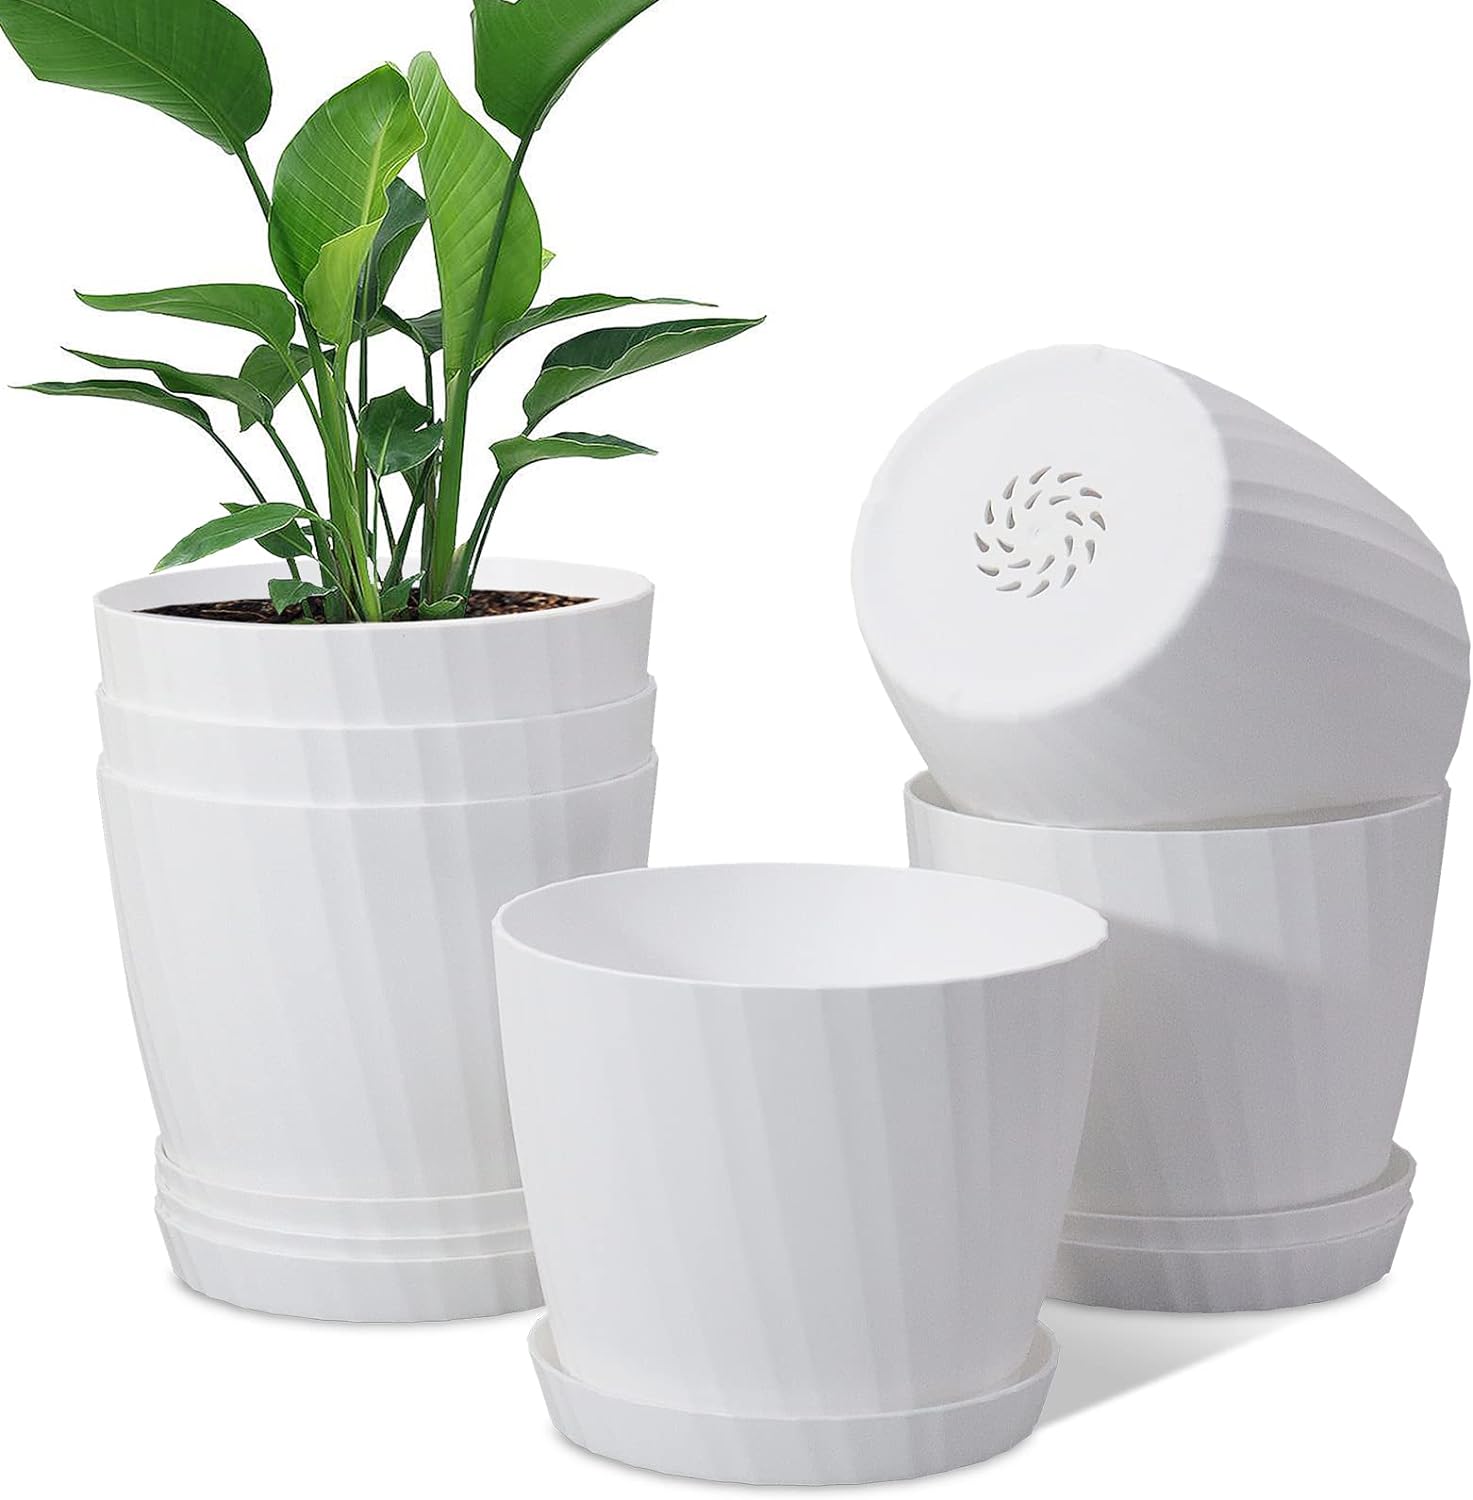 6'' Plant Pots Bulk, 6 Pack Plastic Planters with Drainage Holes and Saucers for Indoor Outdoor House Plants and Flowers, White